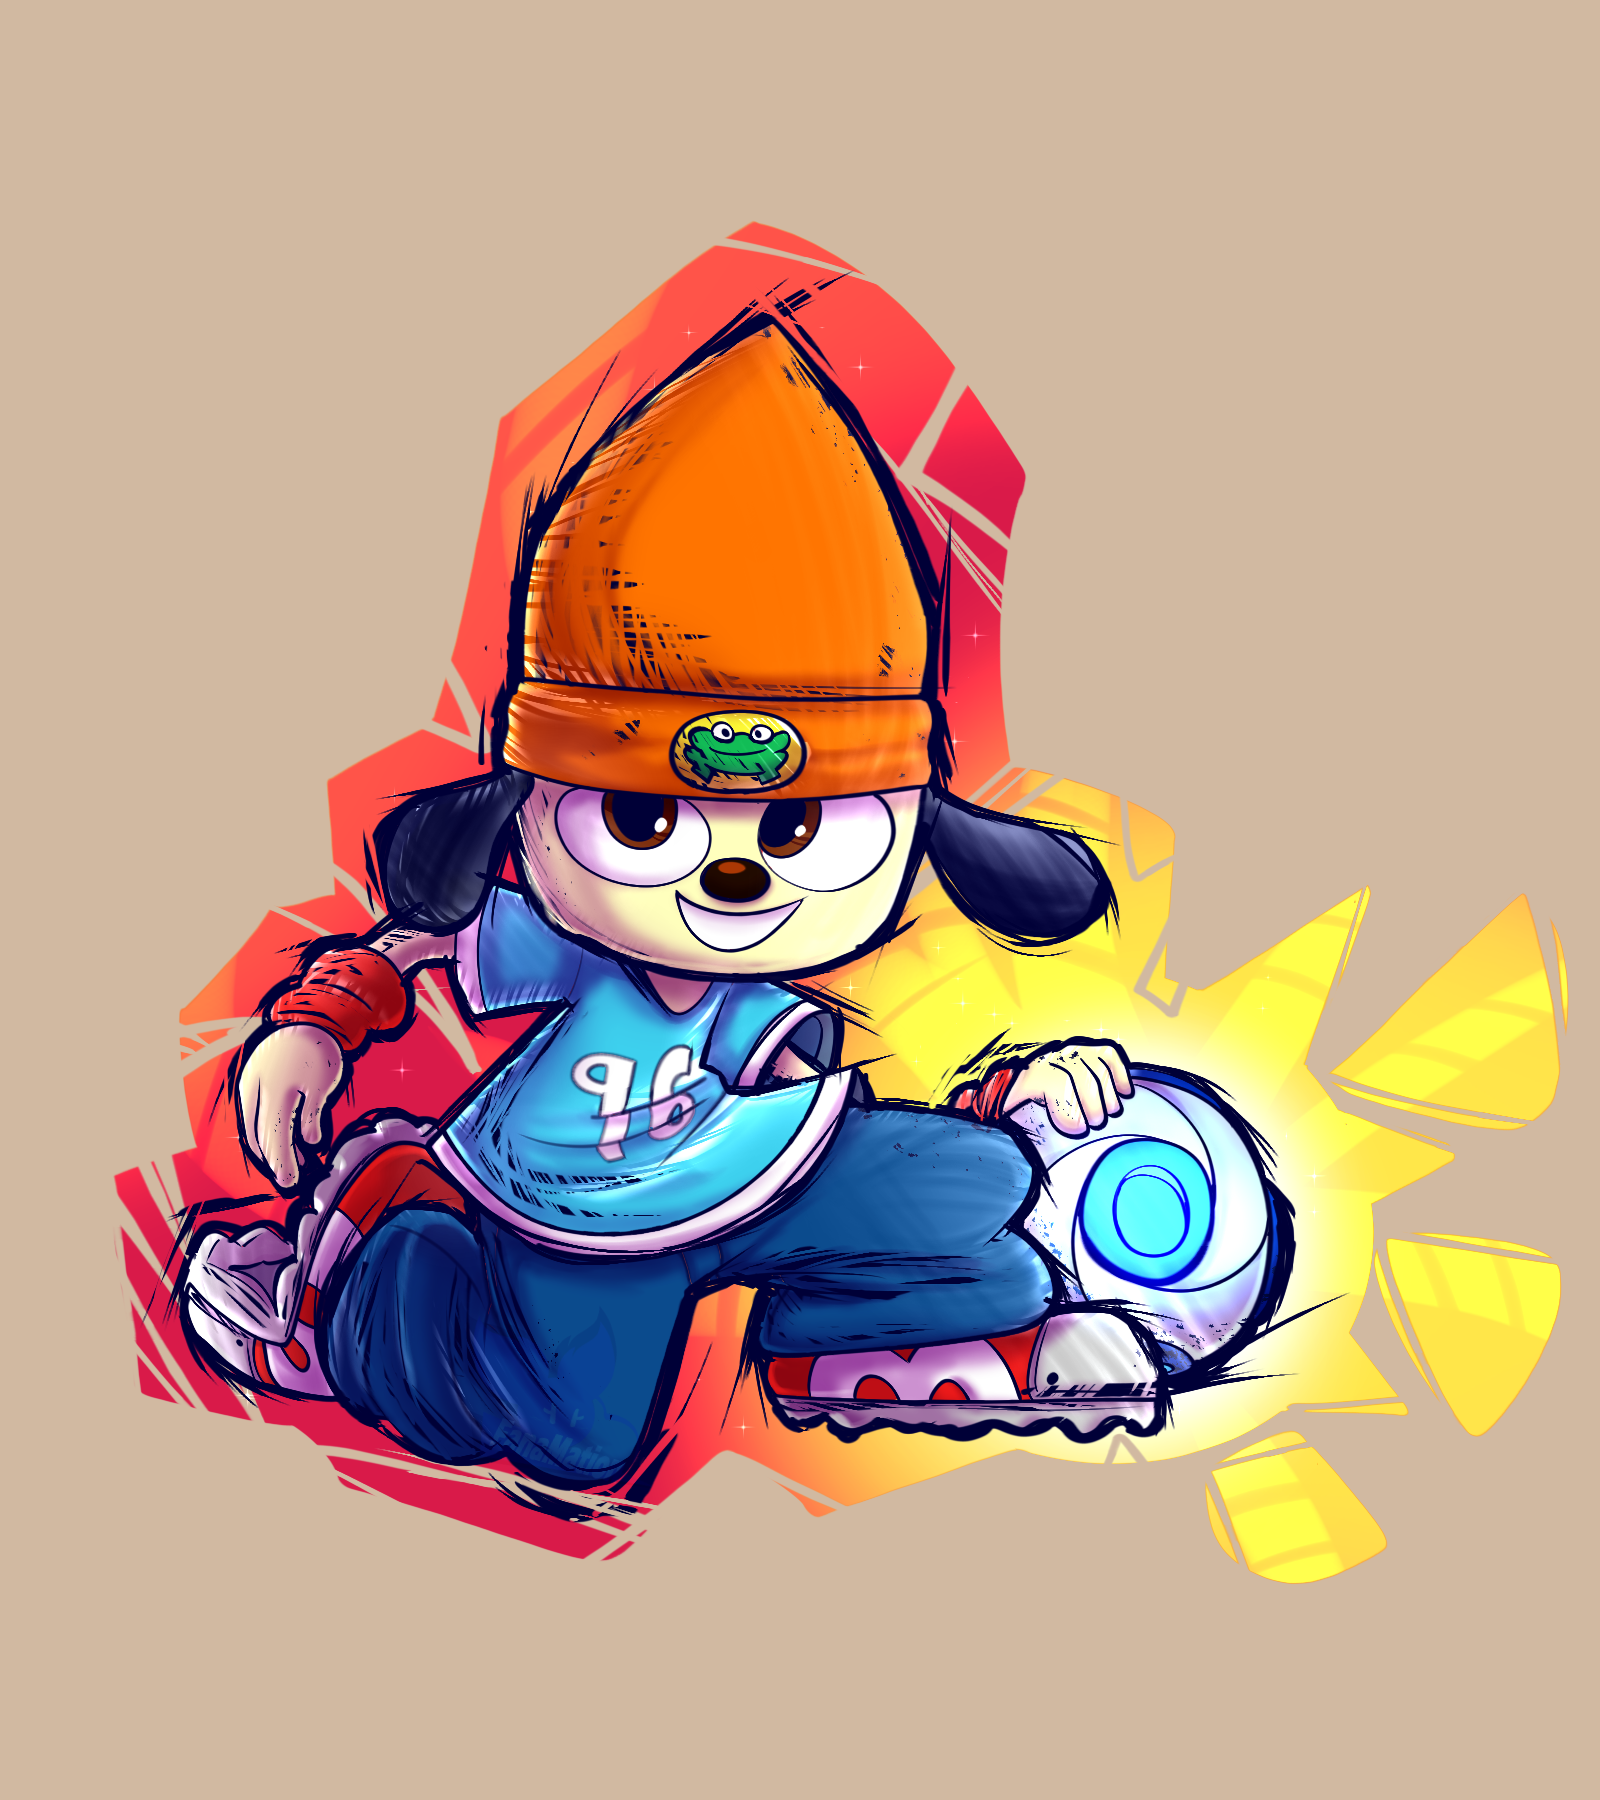 Parappa the Rapper | Magnet